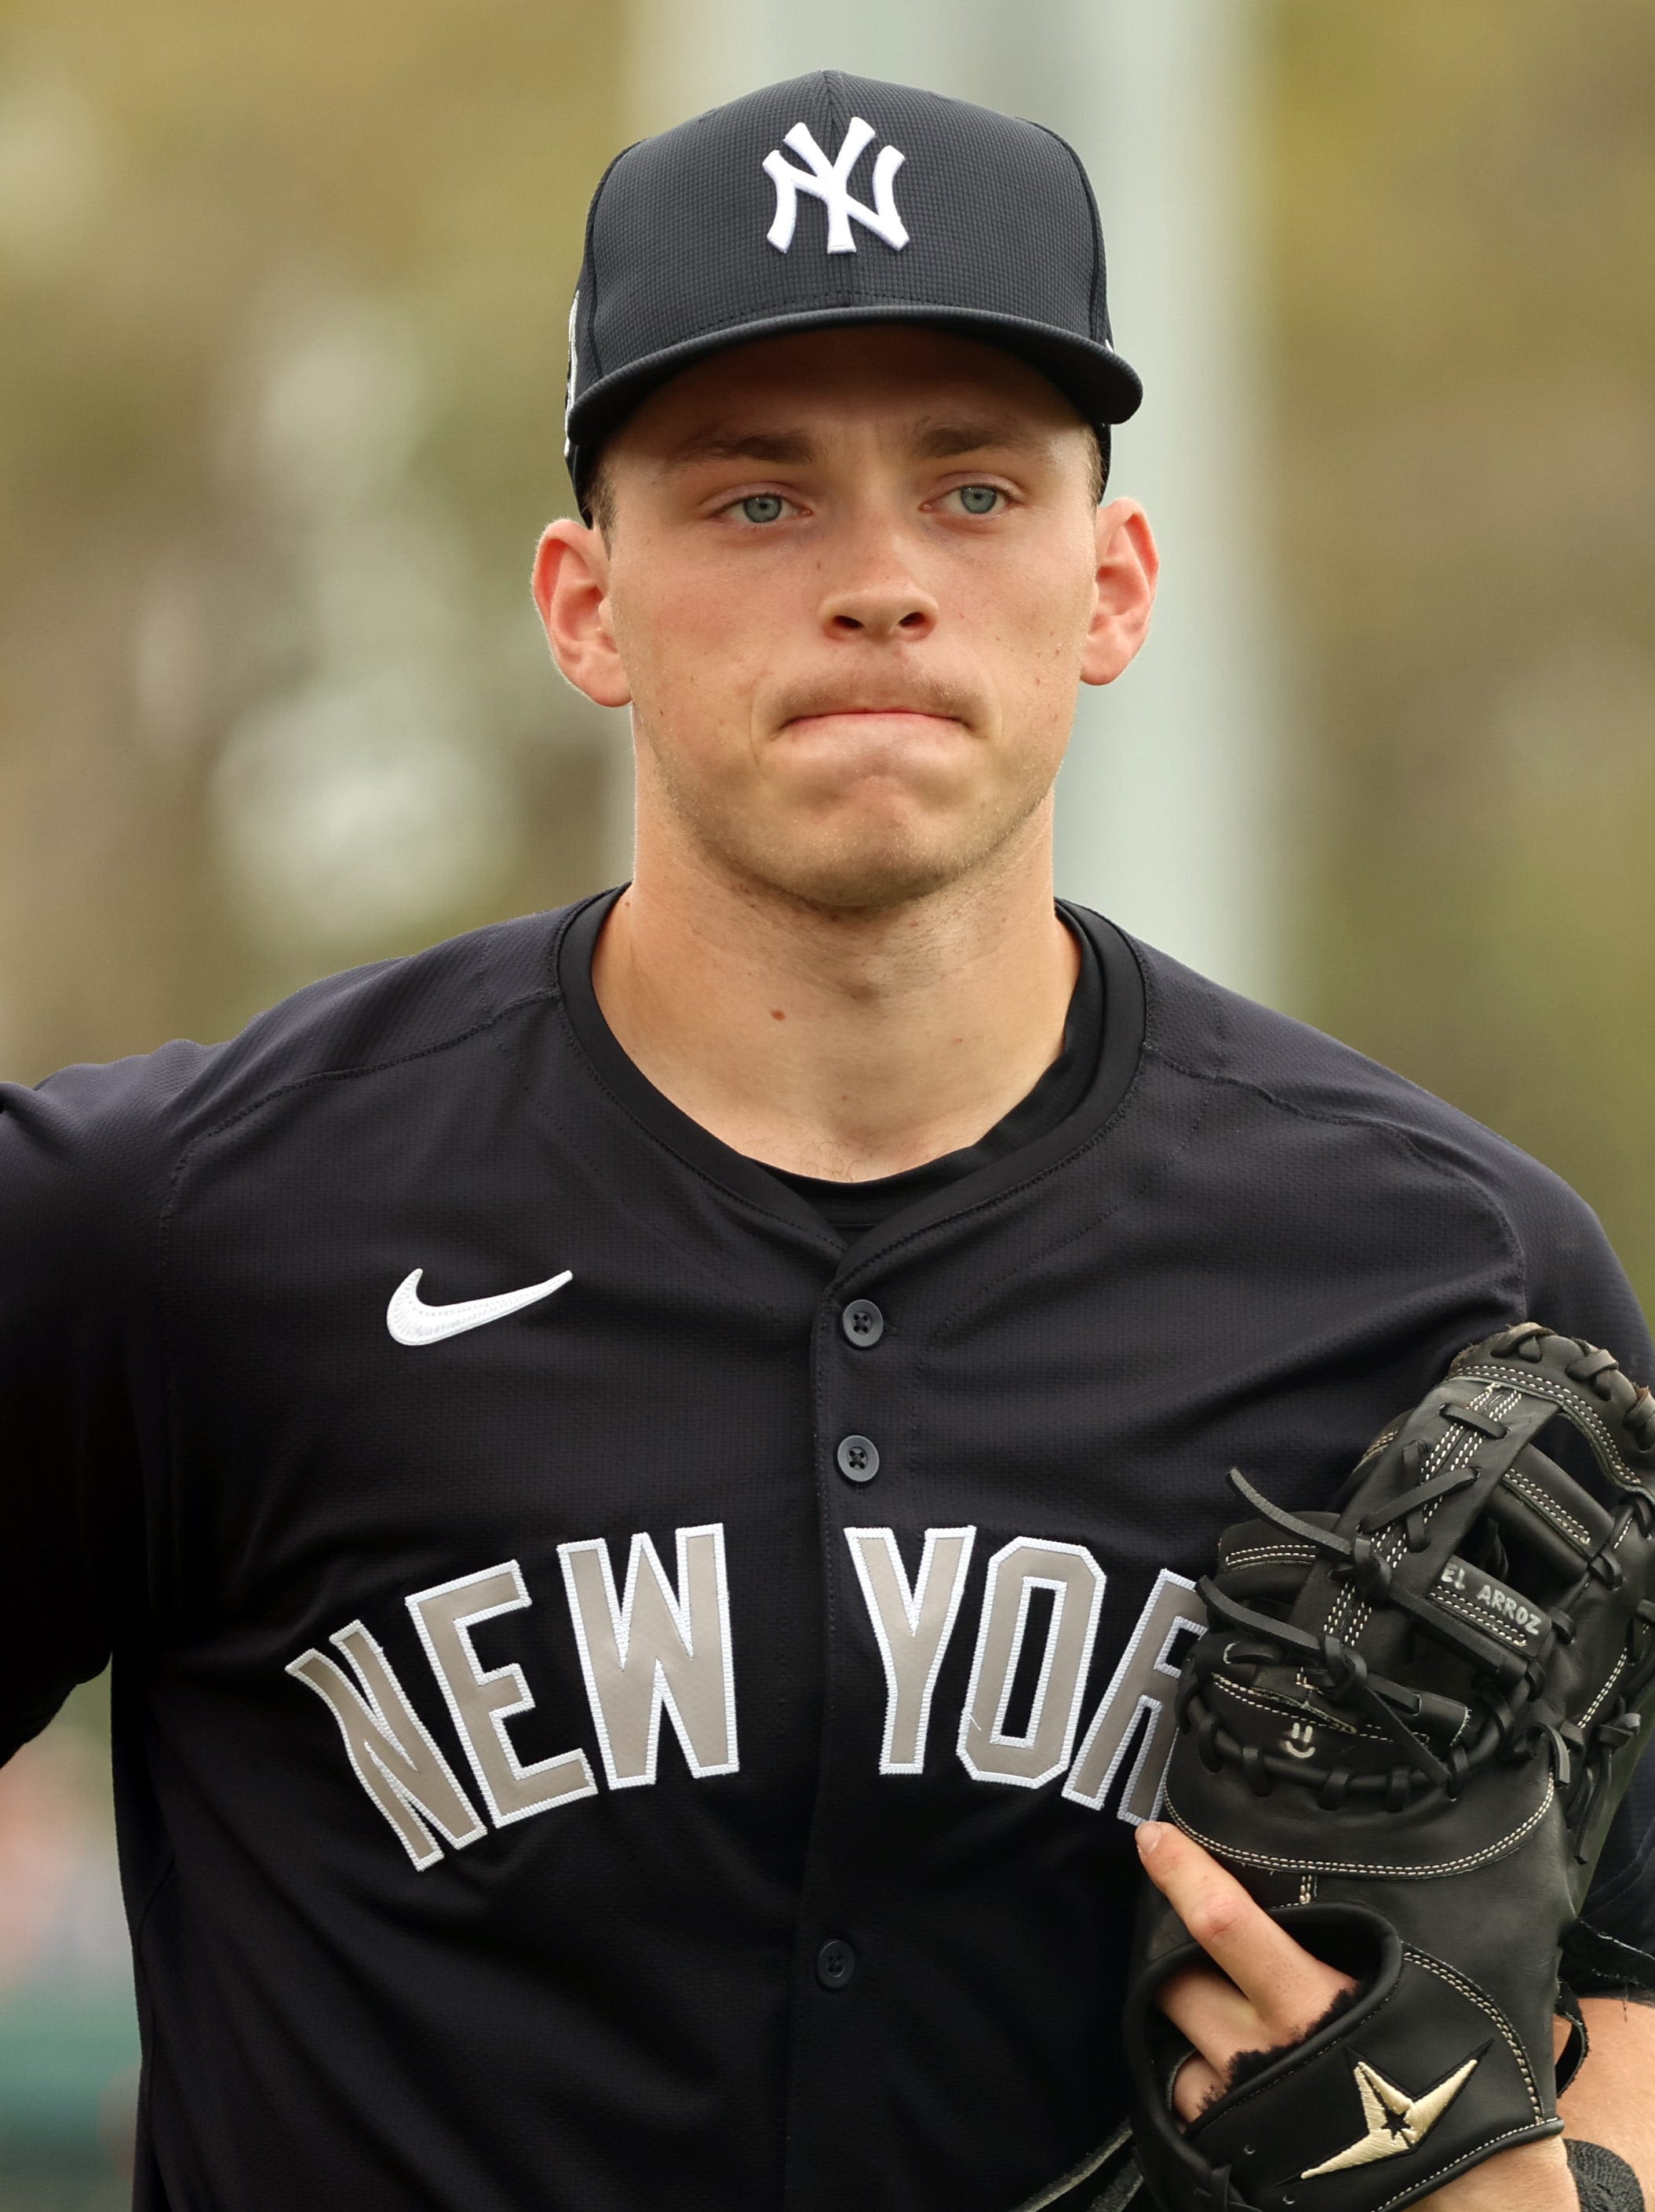 The newest New York Yankee grew up in Massachusetts. The first baseman makes his MLB debut